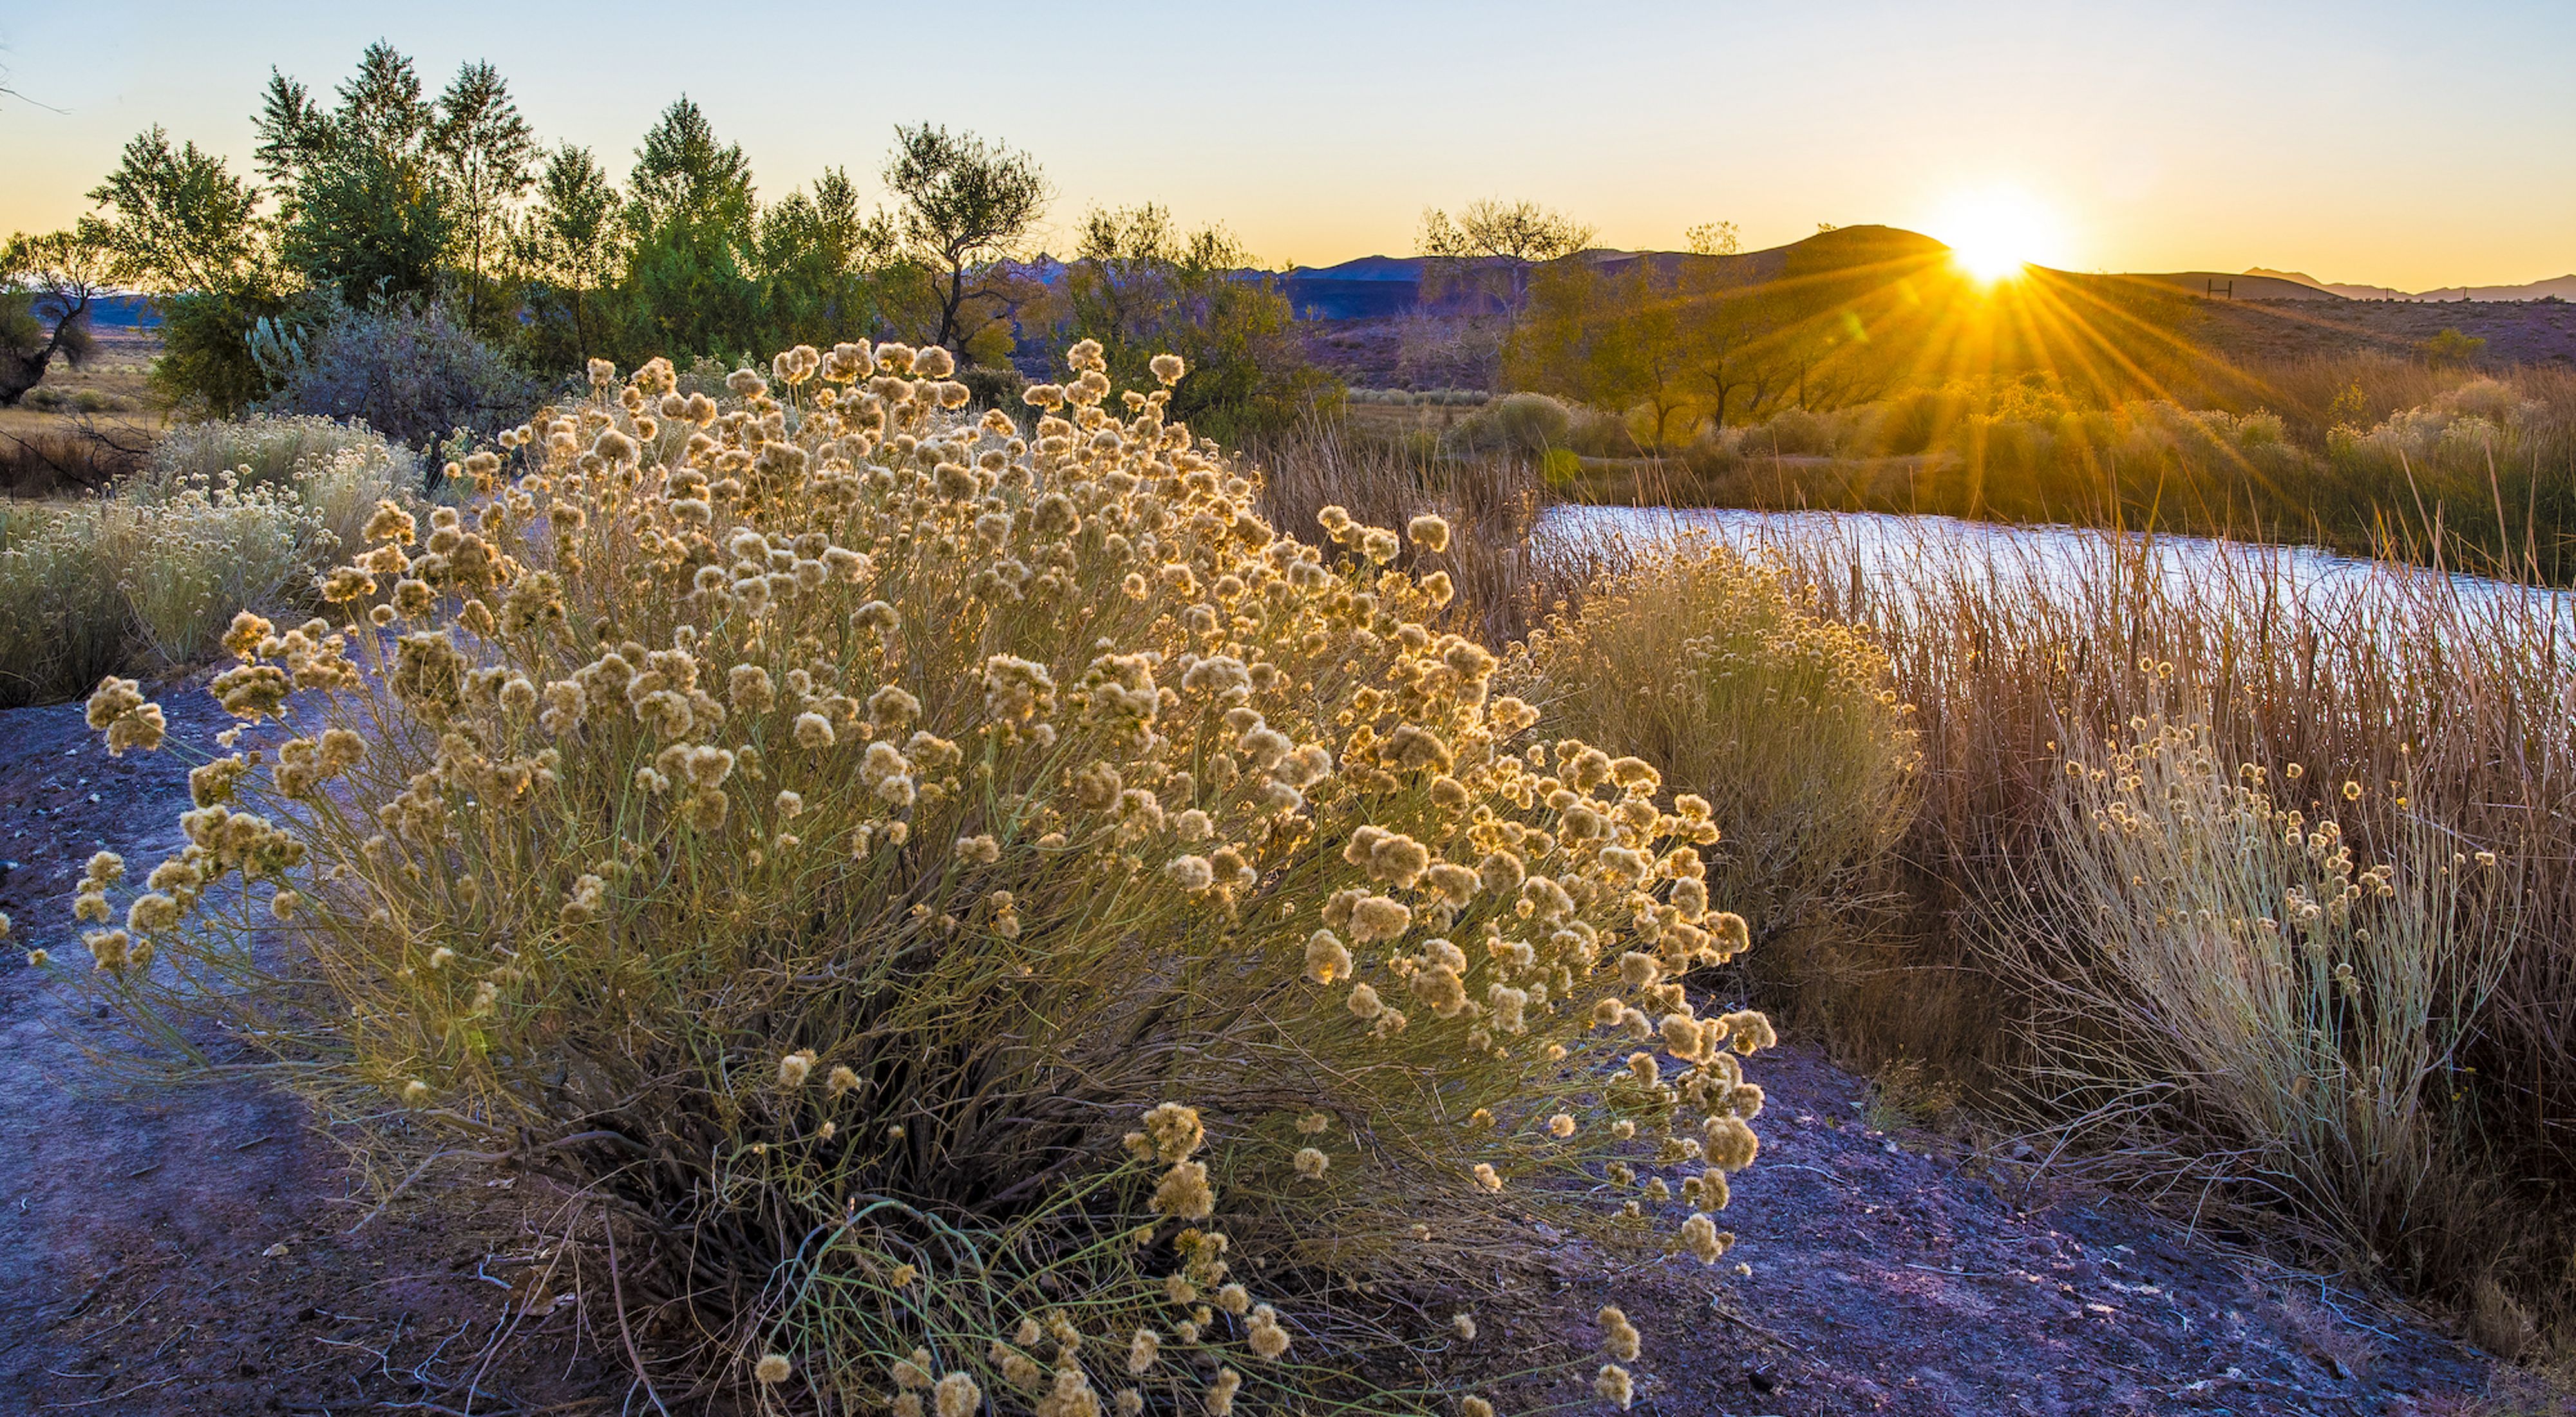 Rabbitbrush in front of a pond with the sun shining in the background